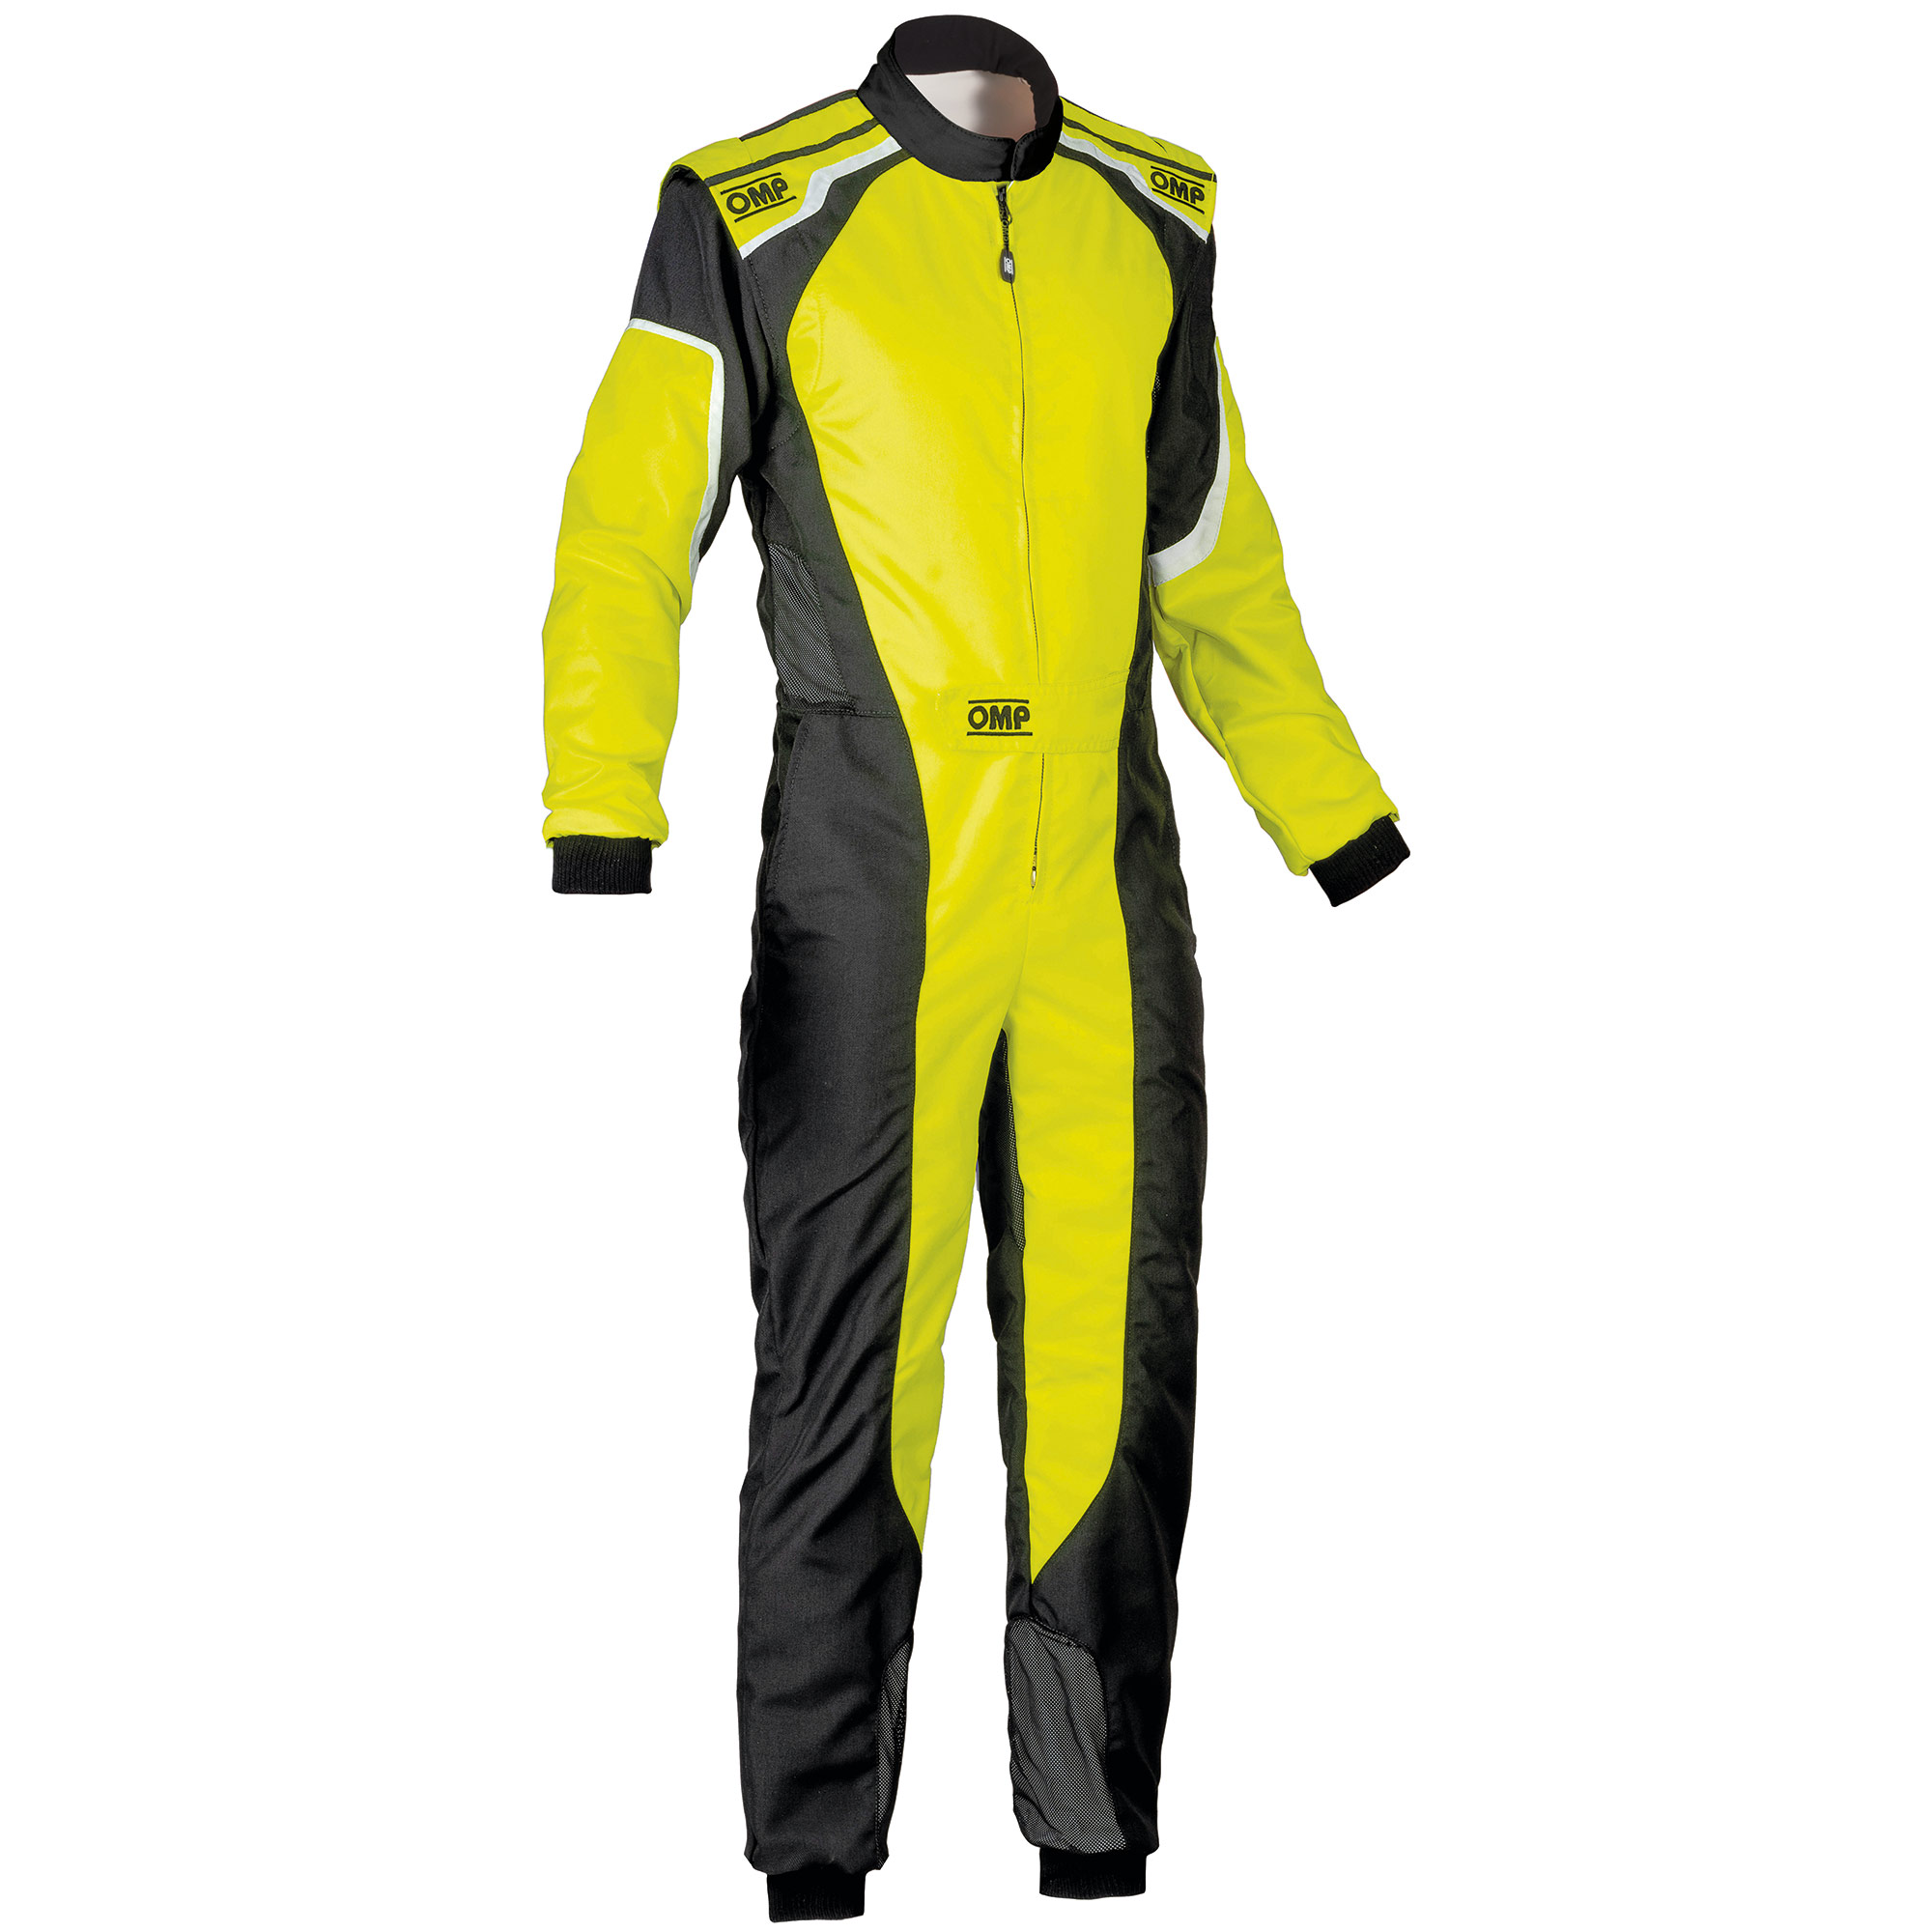 Adult Cordura Double layer CIK-FIA Level 2 Approved Karting Racing Cordura Suit 